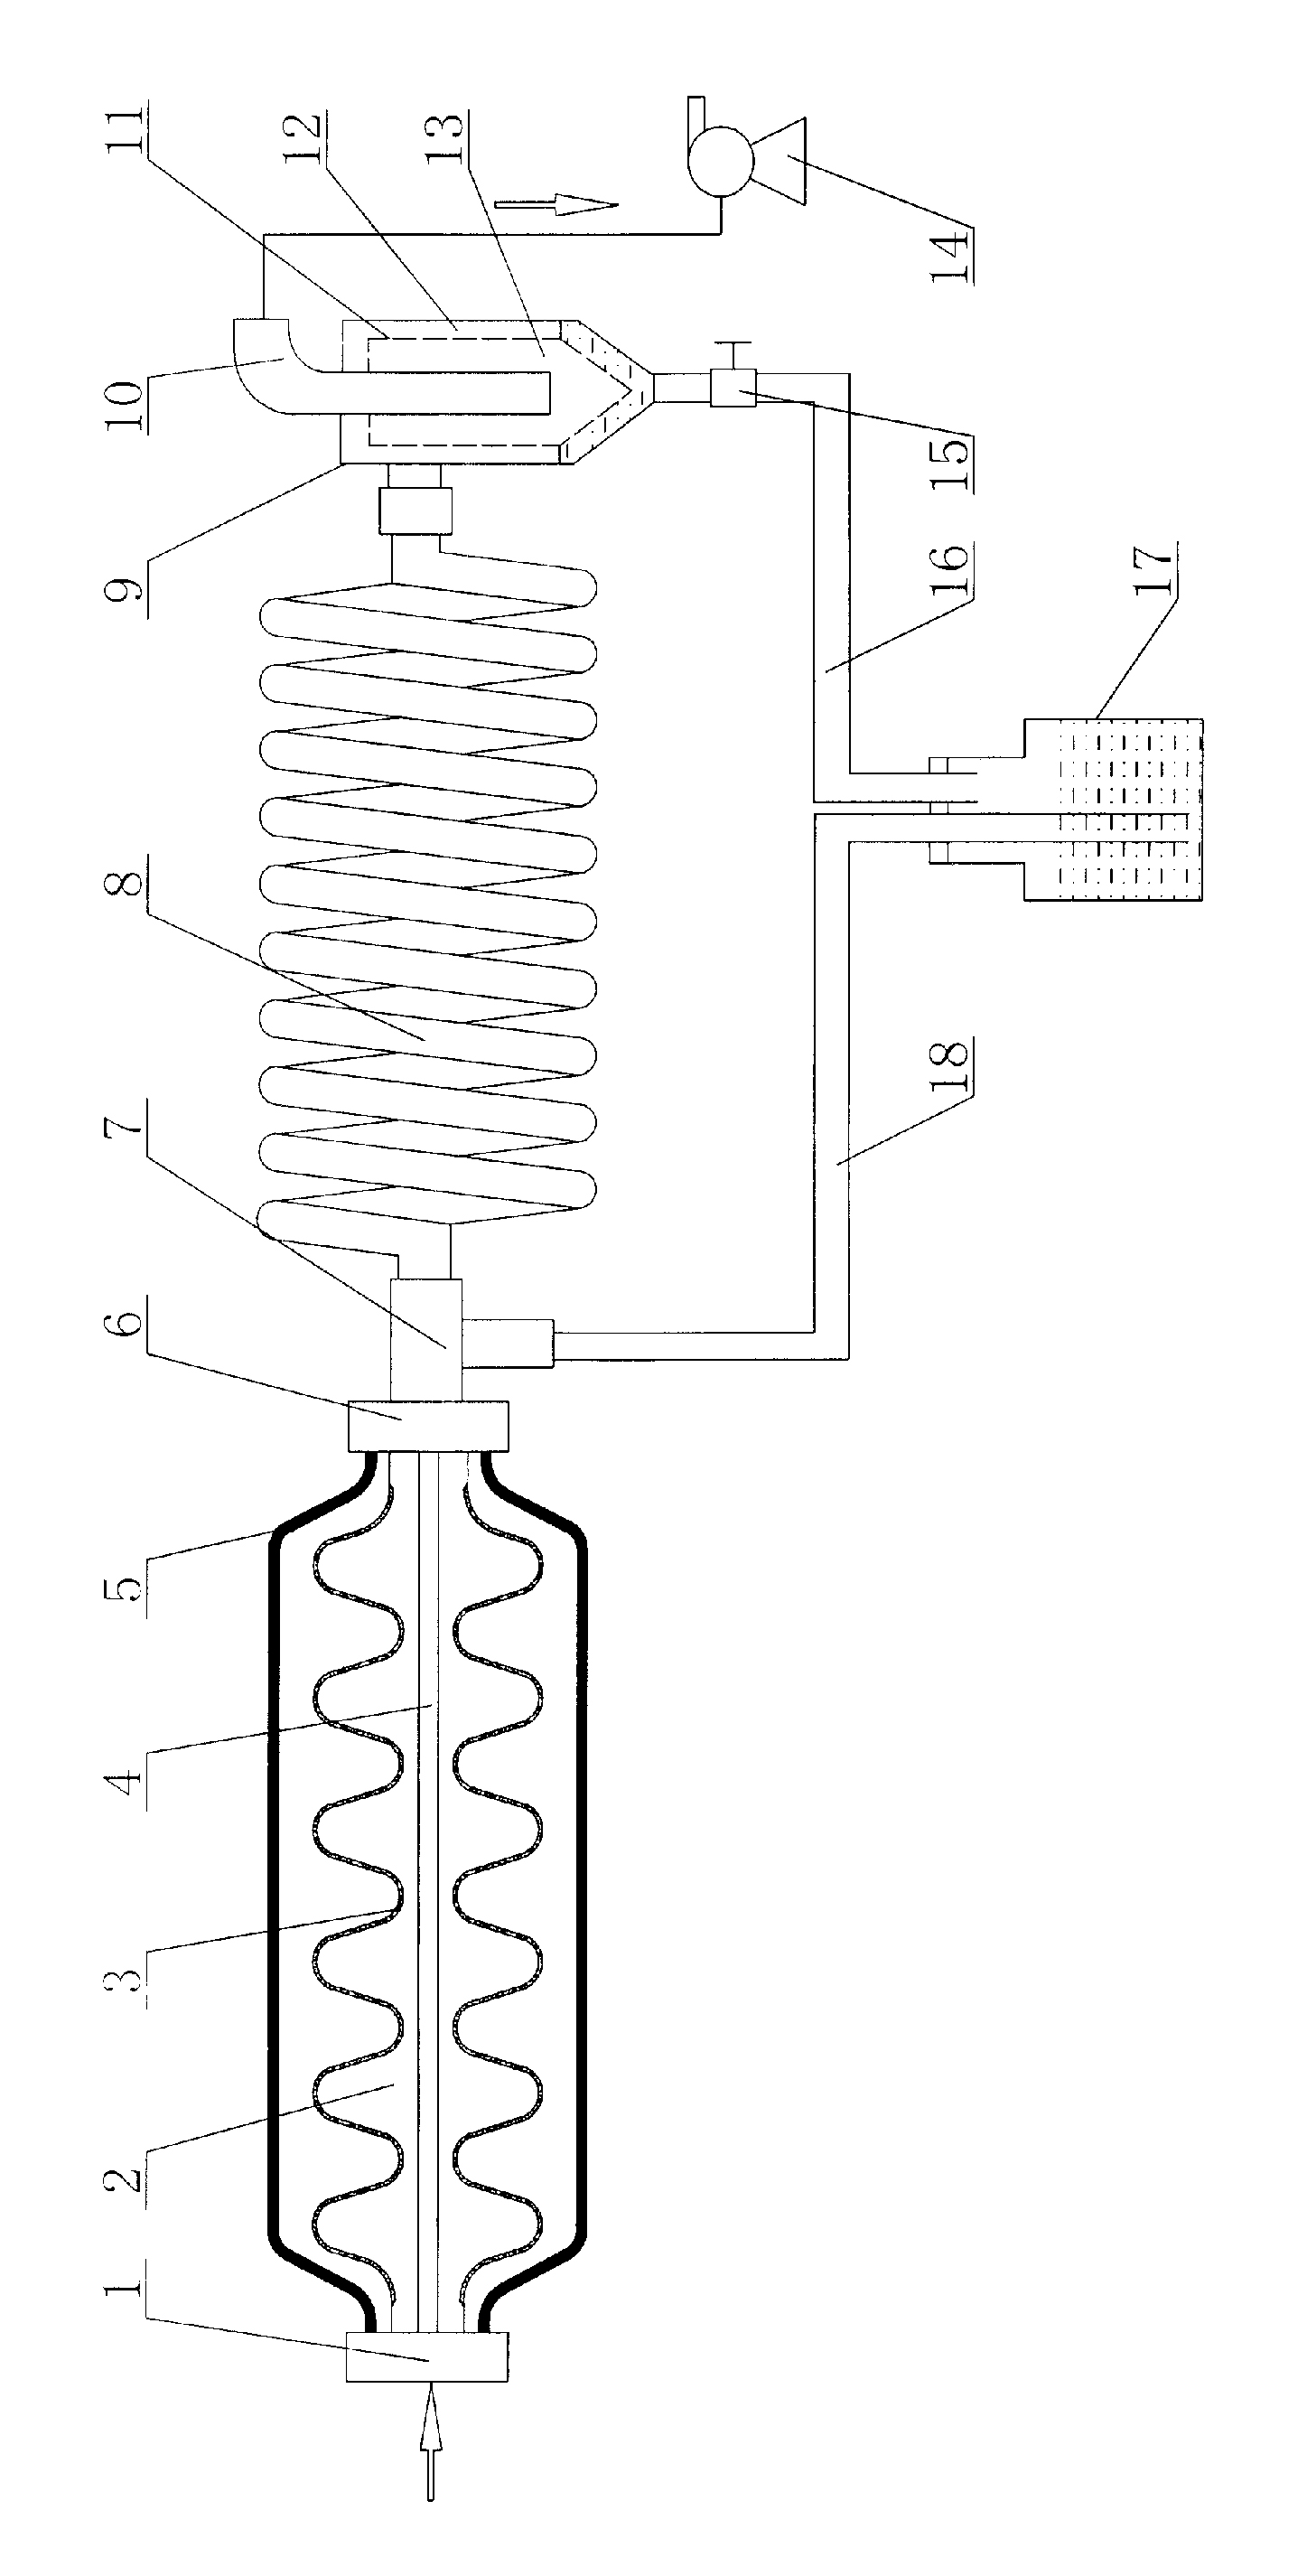 Device and method for purifying indoor air